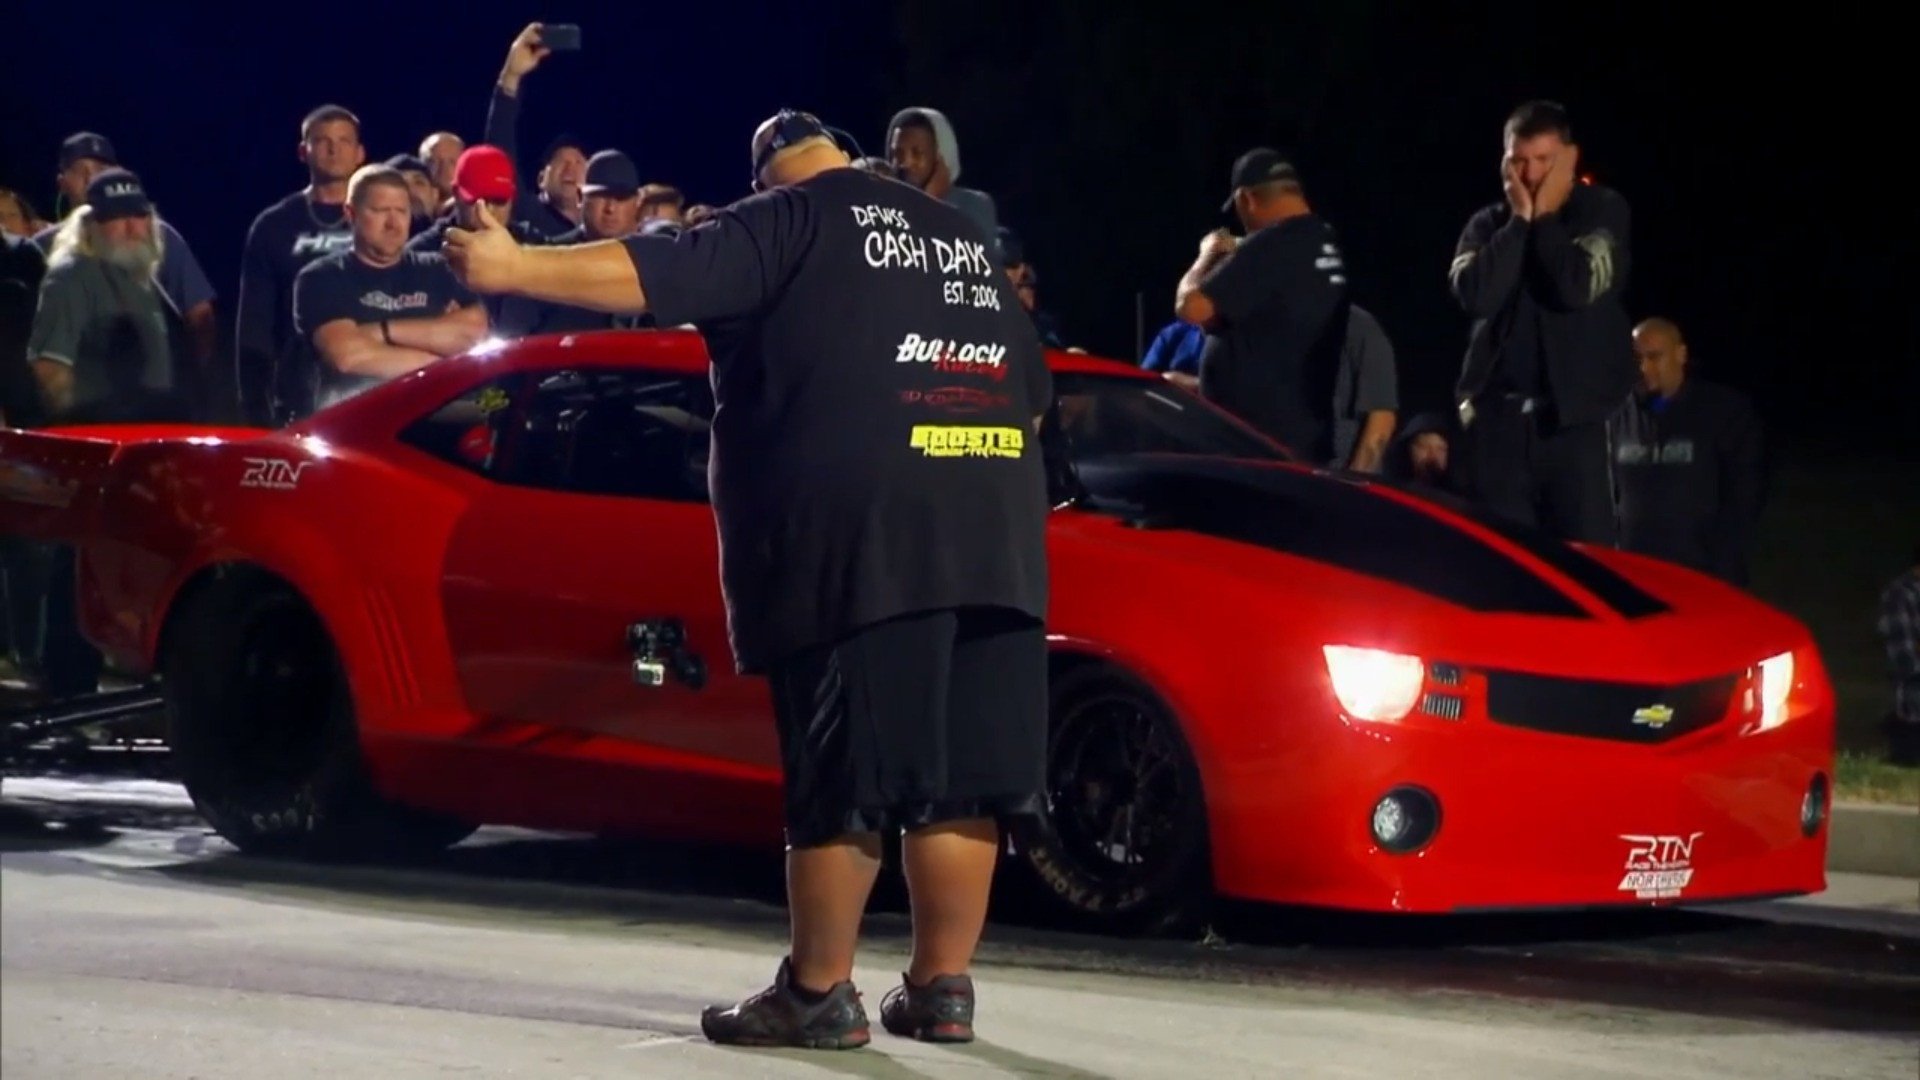 Street Outlaws 11, Episode 1 Cash Days Comes to OKC MotorTrend